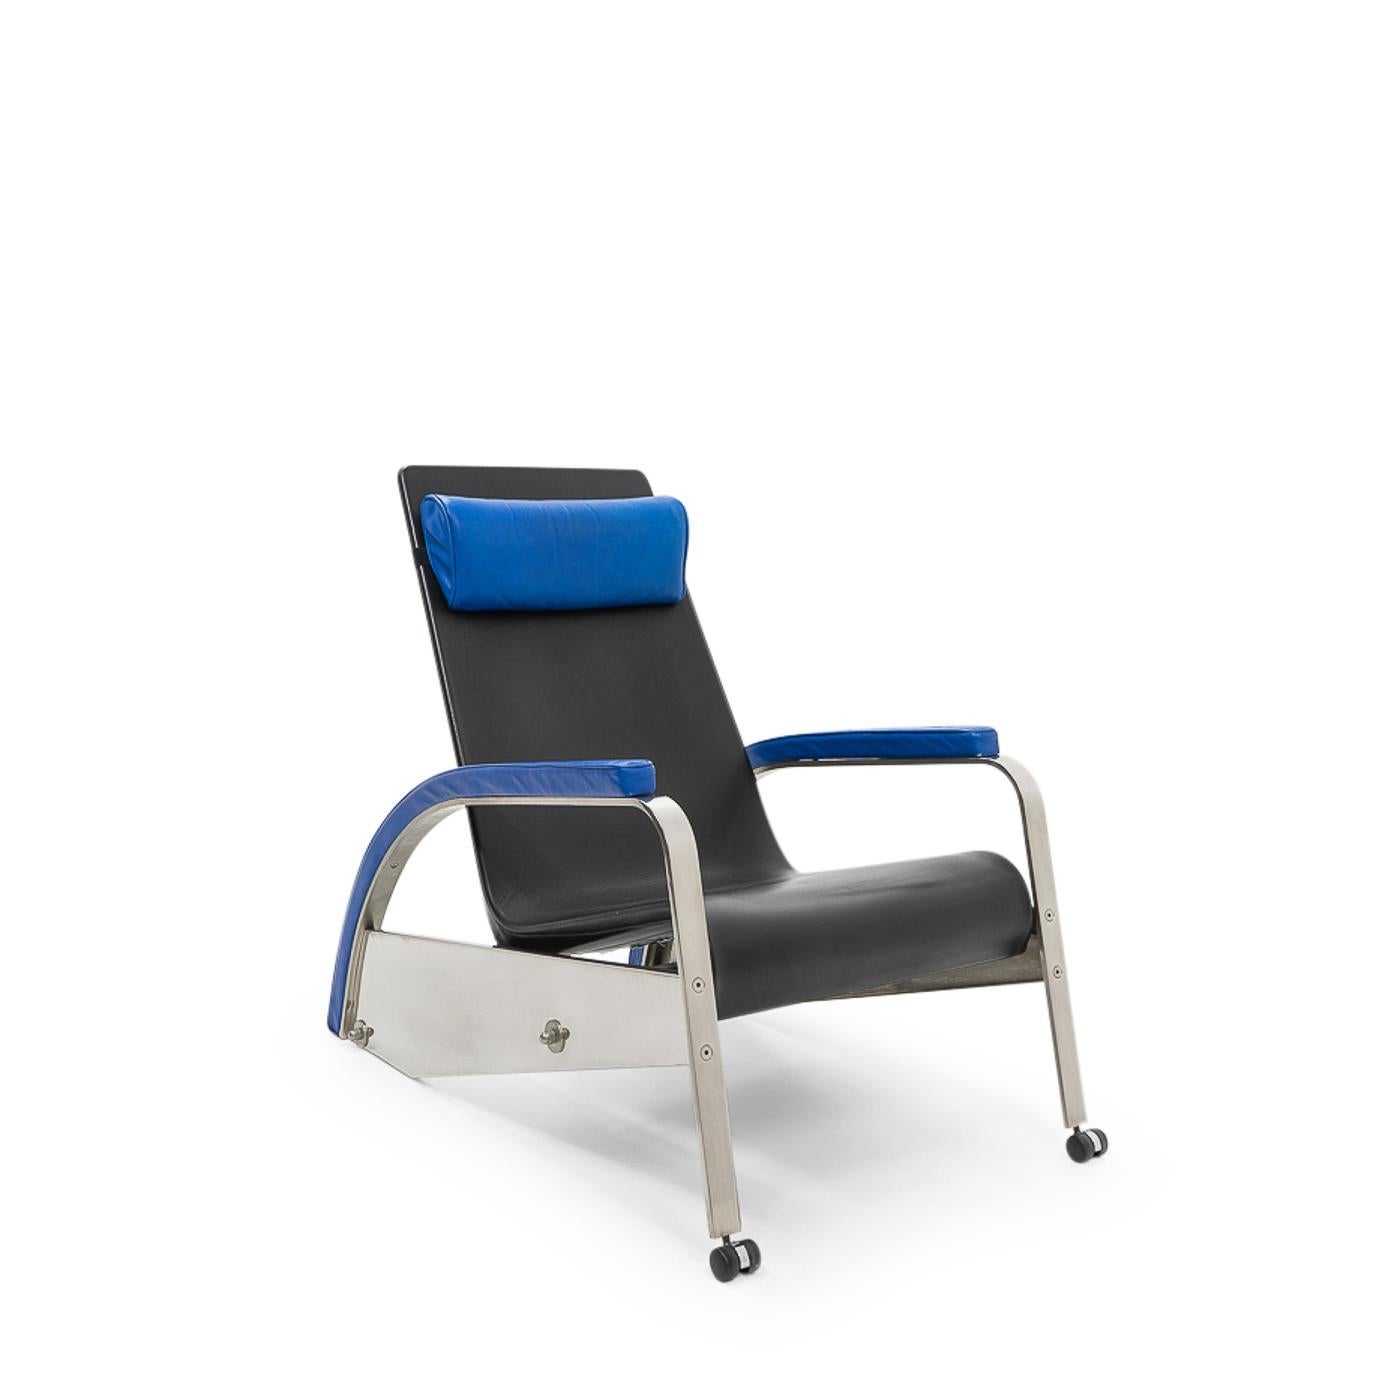 The D80 lounge chair (also called the Machine Chair) was originally designed during the 1920s by Jean Prouvé for his own use:

The chair is built up in metal, with a leather seat stretched over a frame that can be changed position due to the